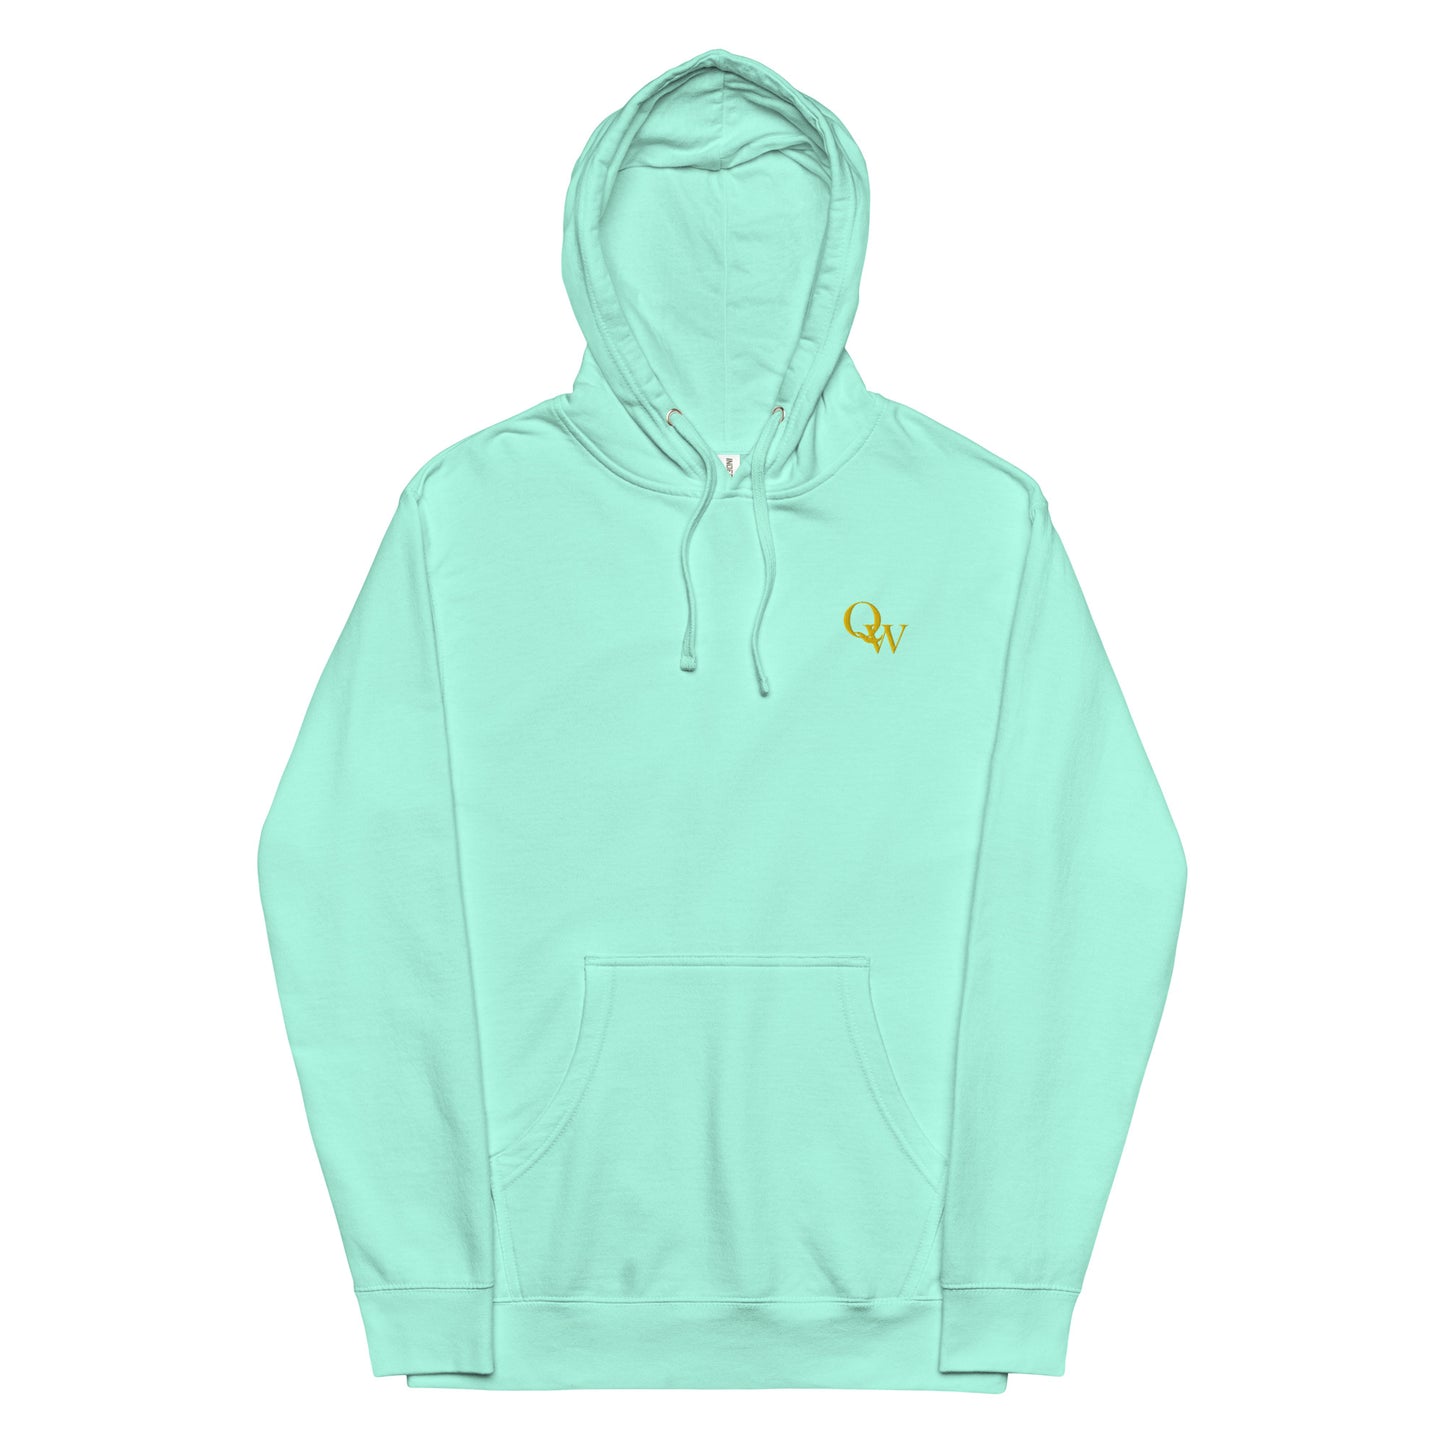 Live With Mistakes Hoodie (Black)